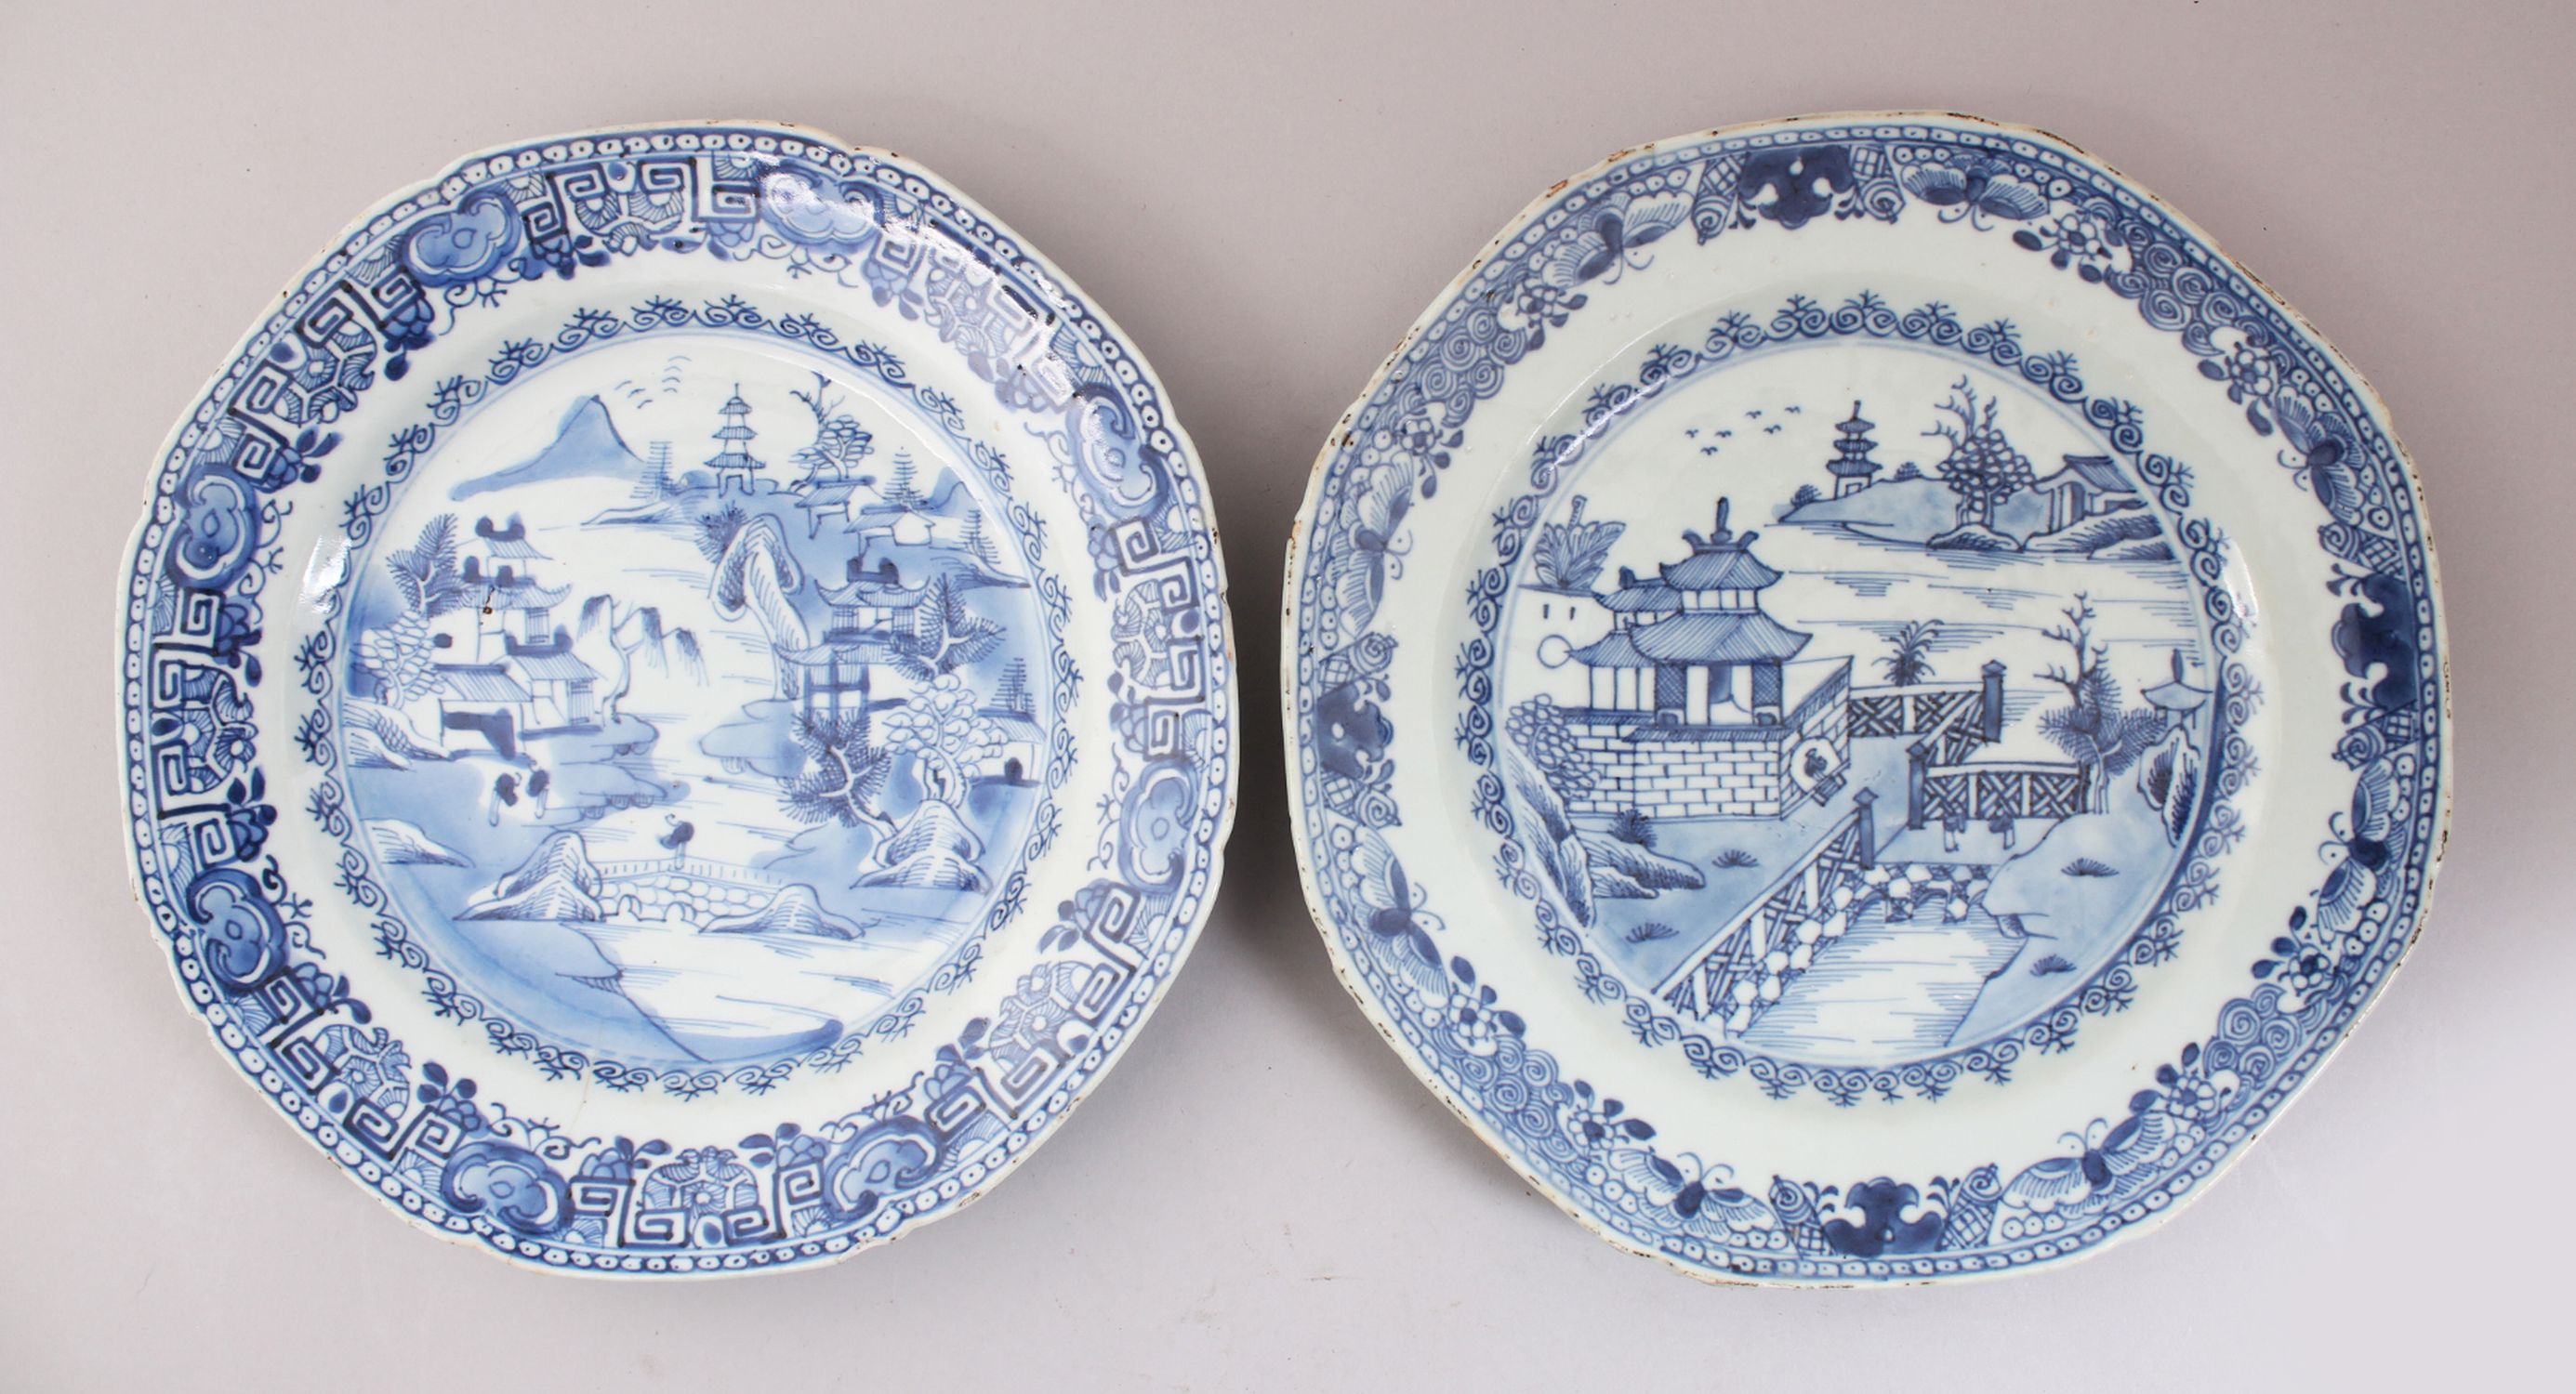 A PAIR OF 19TH CENTURY CHINESE EXPORT BLUE & WHITE PLATES, decorated with landscape scenes, 22.5cm